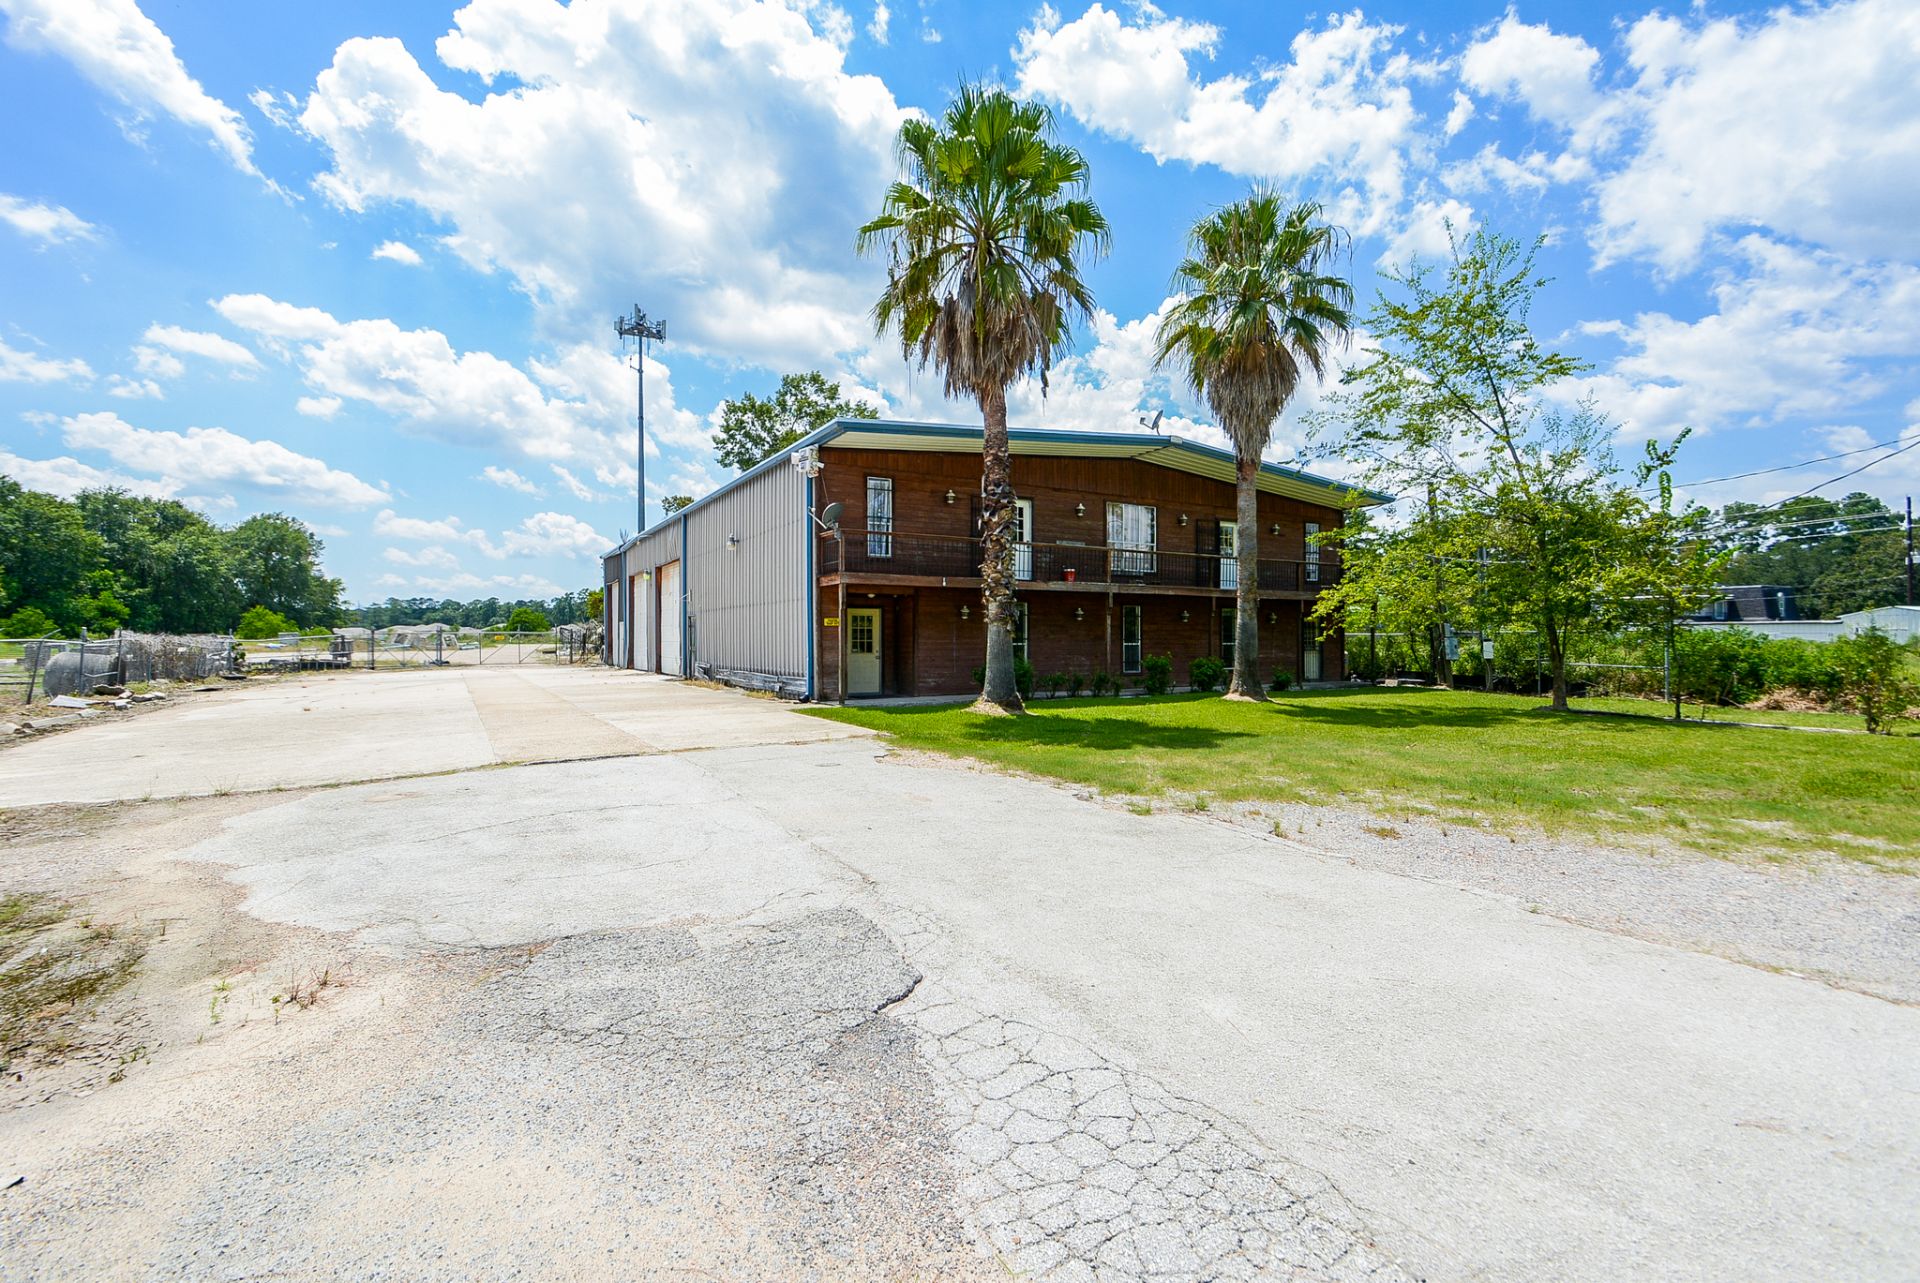 Industrial/Commercial Property on W Hardy in Spring, TX - Image 21 of 21